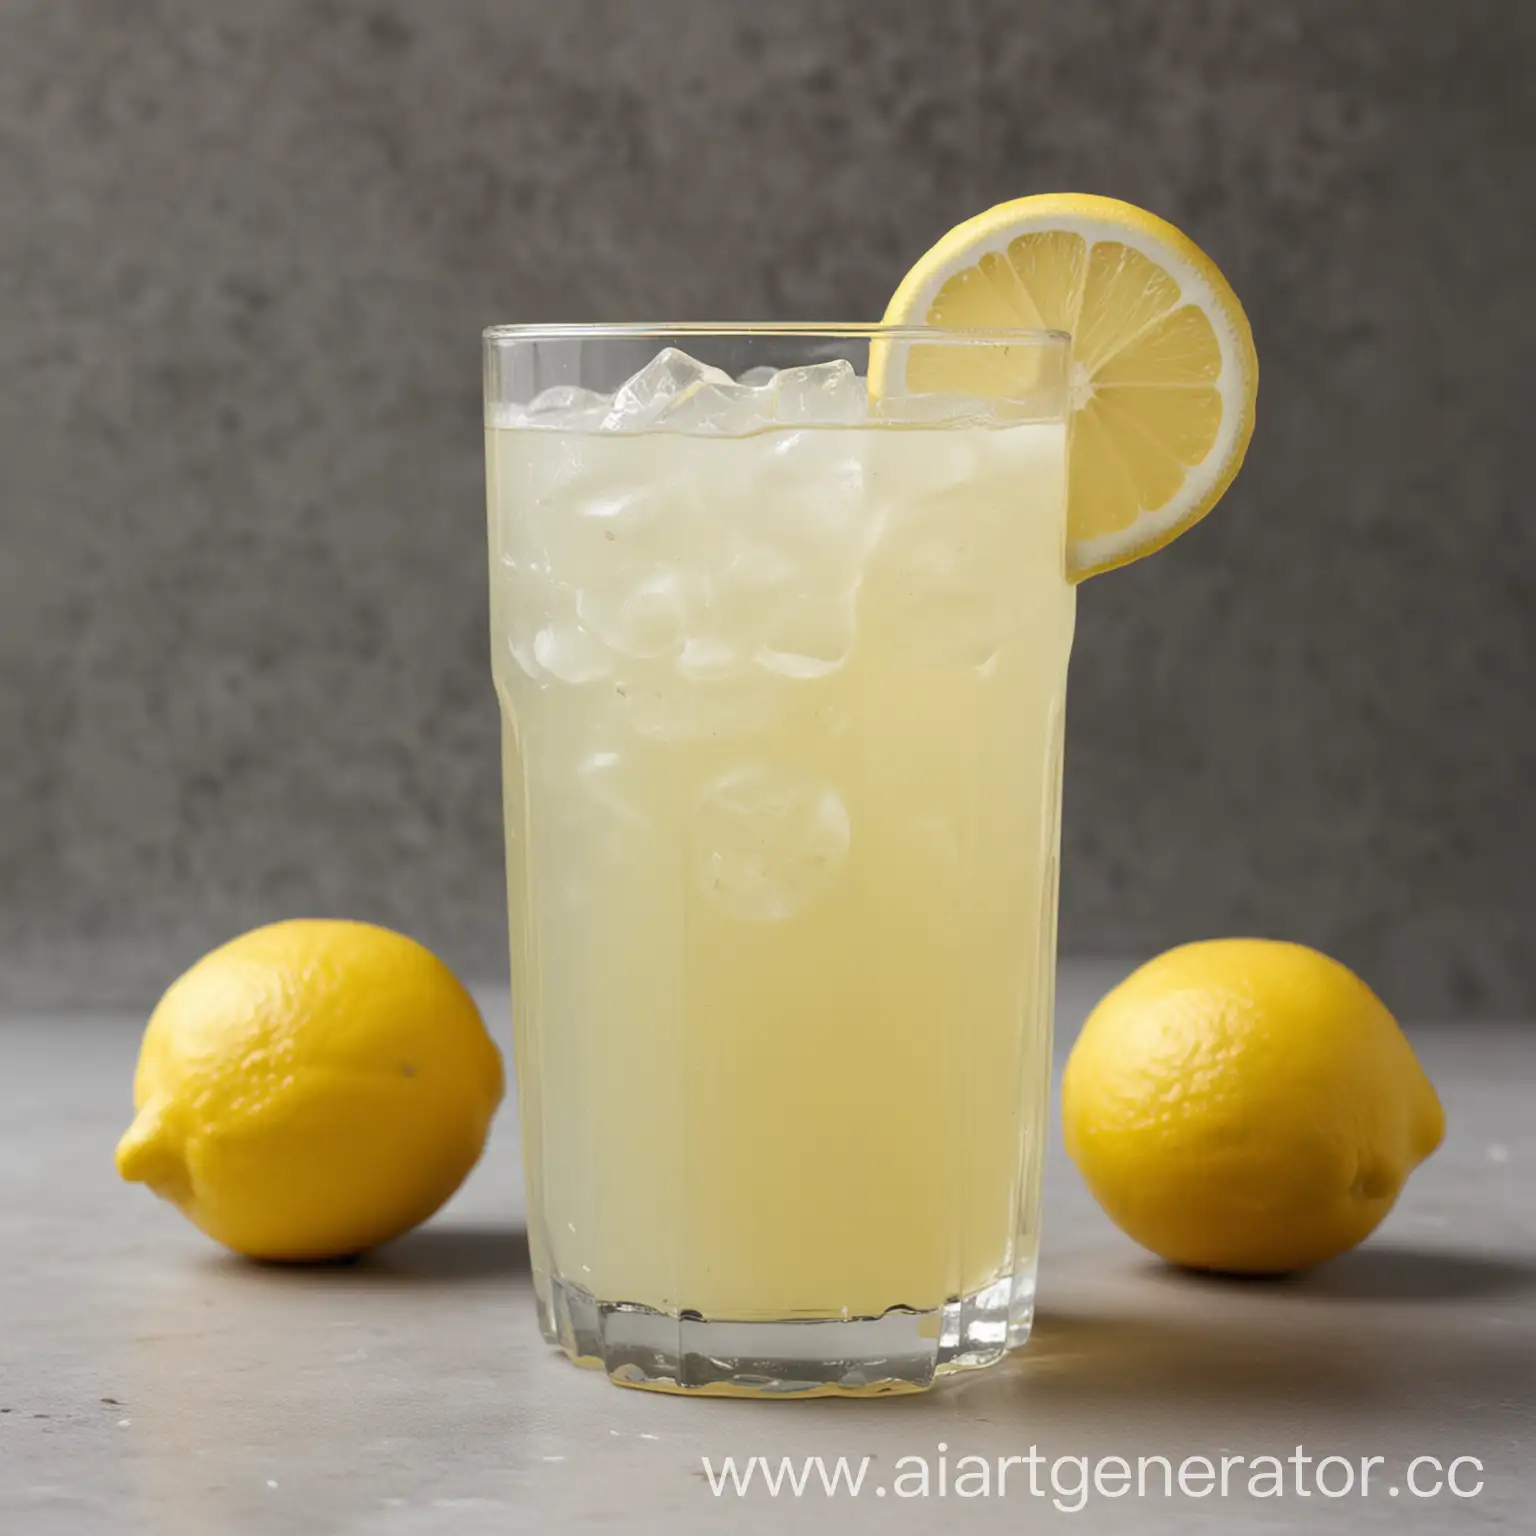 Unpleasant-Lemonade-Sour-Expression-on-a-Summer-Day